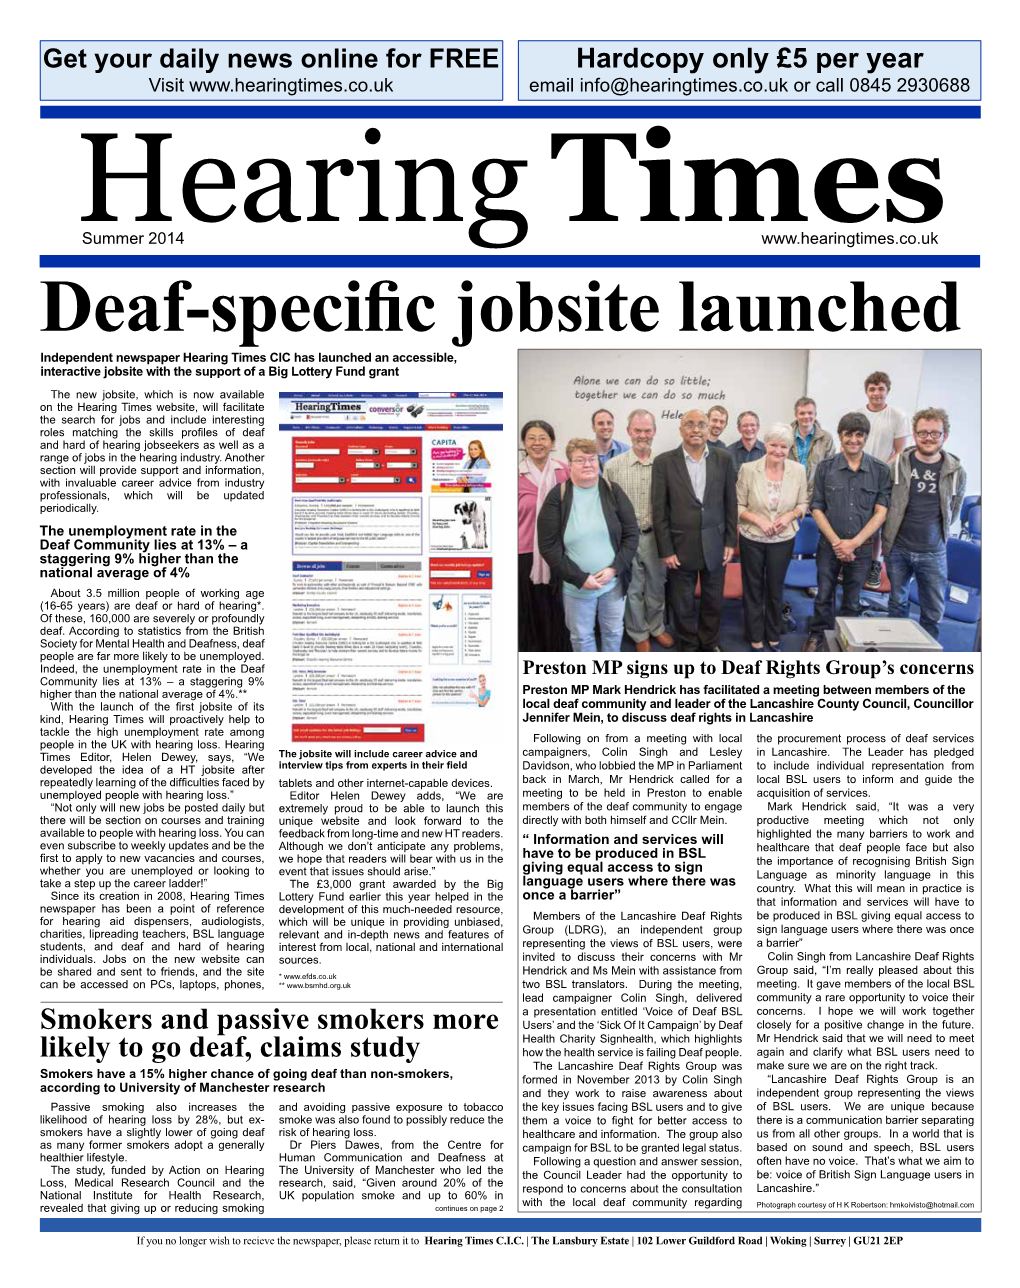 Deaf-Specific Jobsite Launched